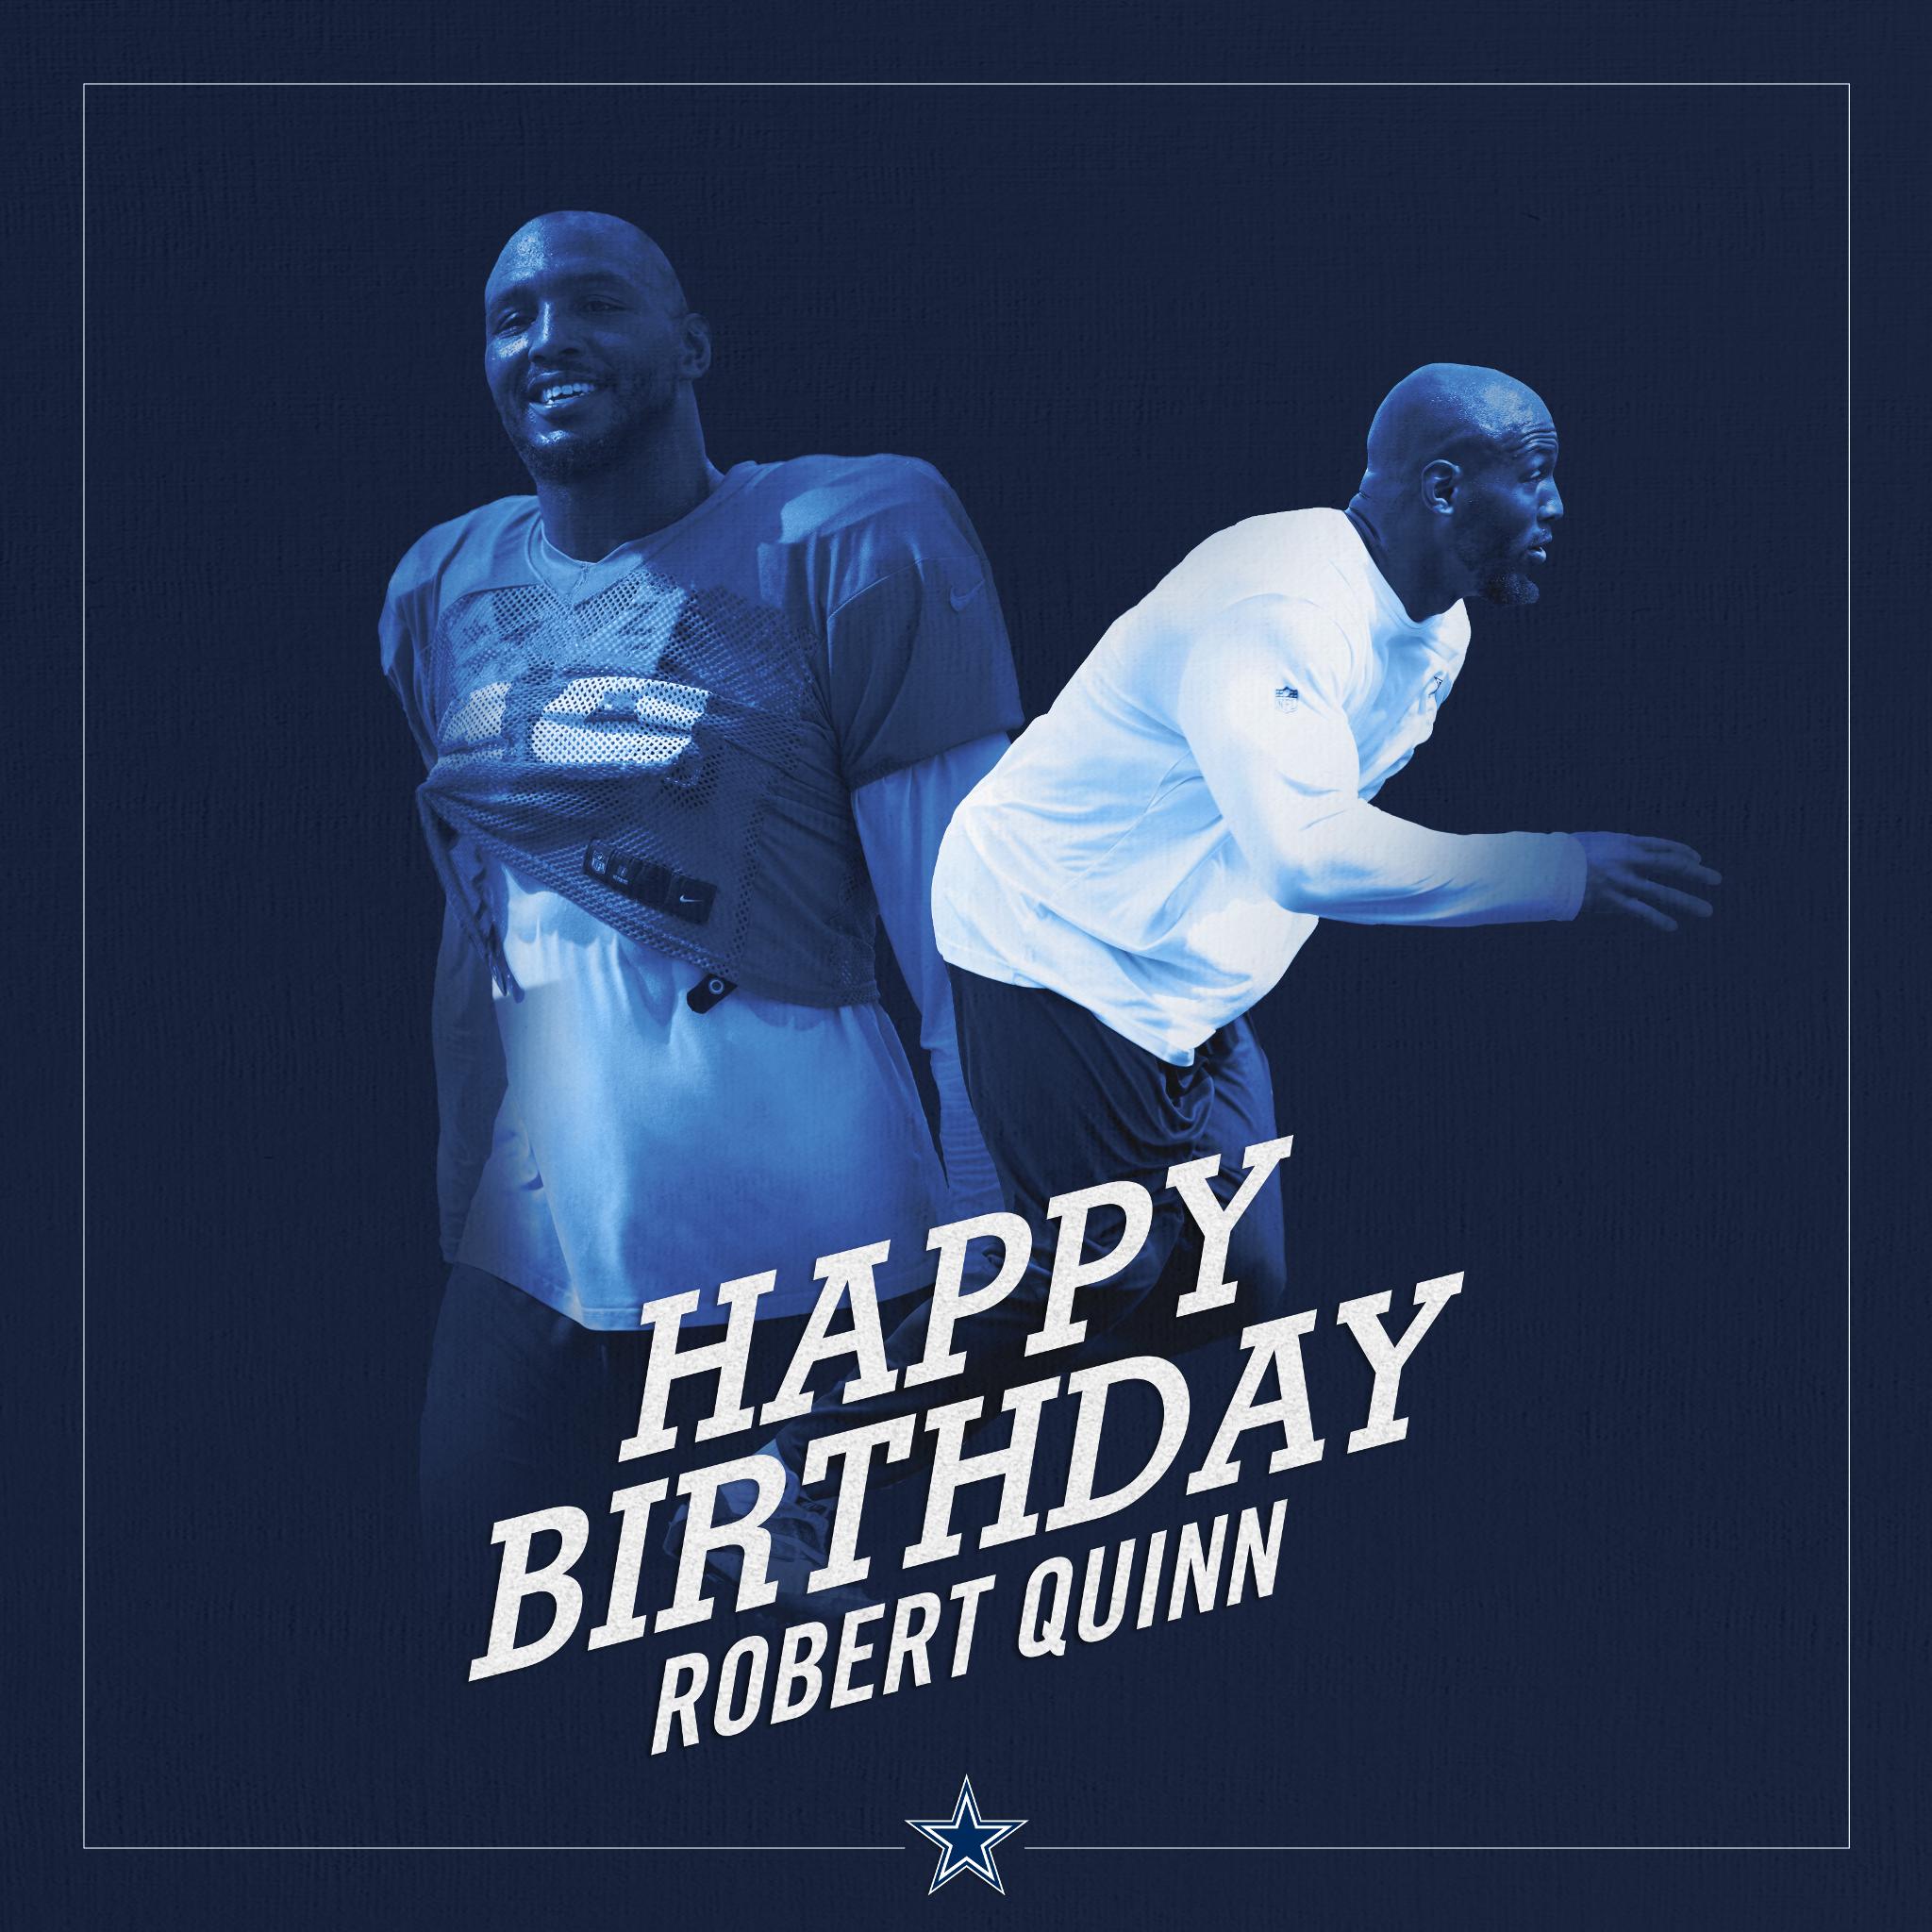  join us in wishing Robert Quinn a happy birthday! 